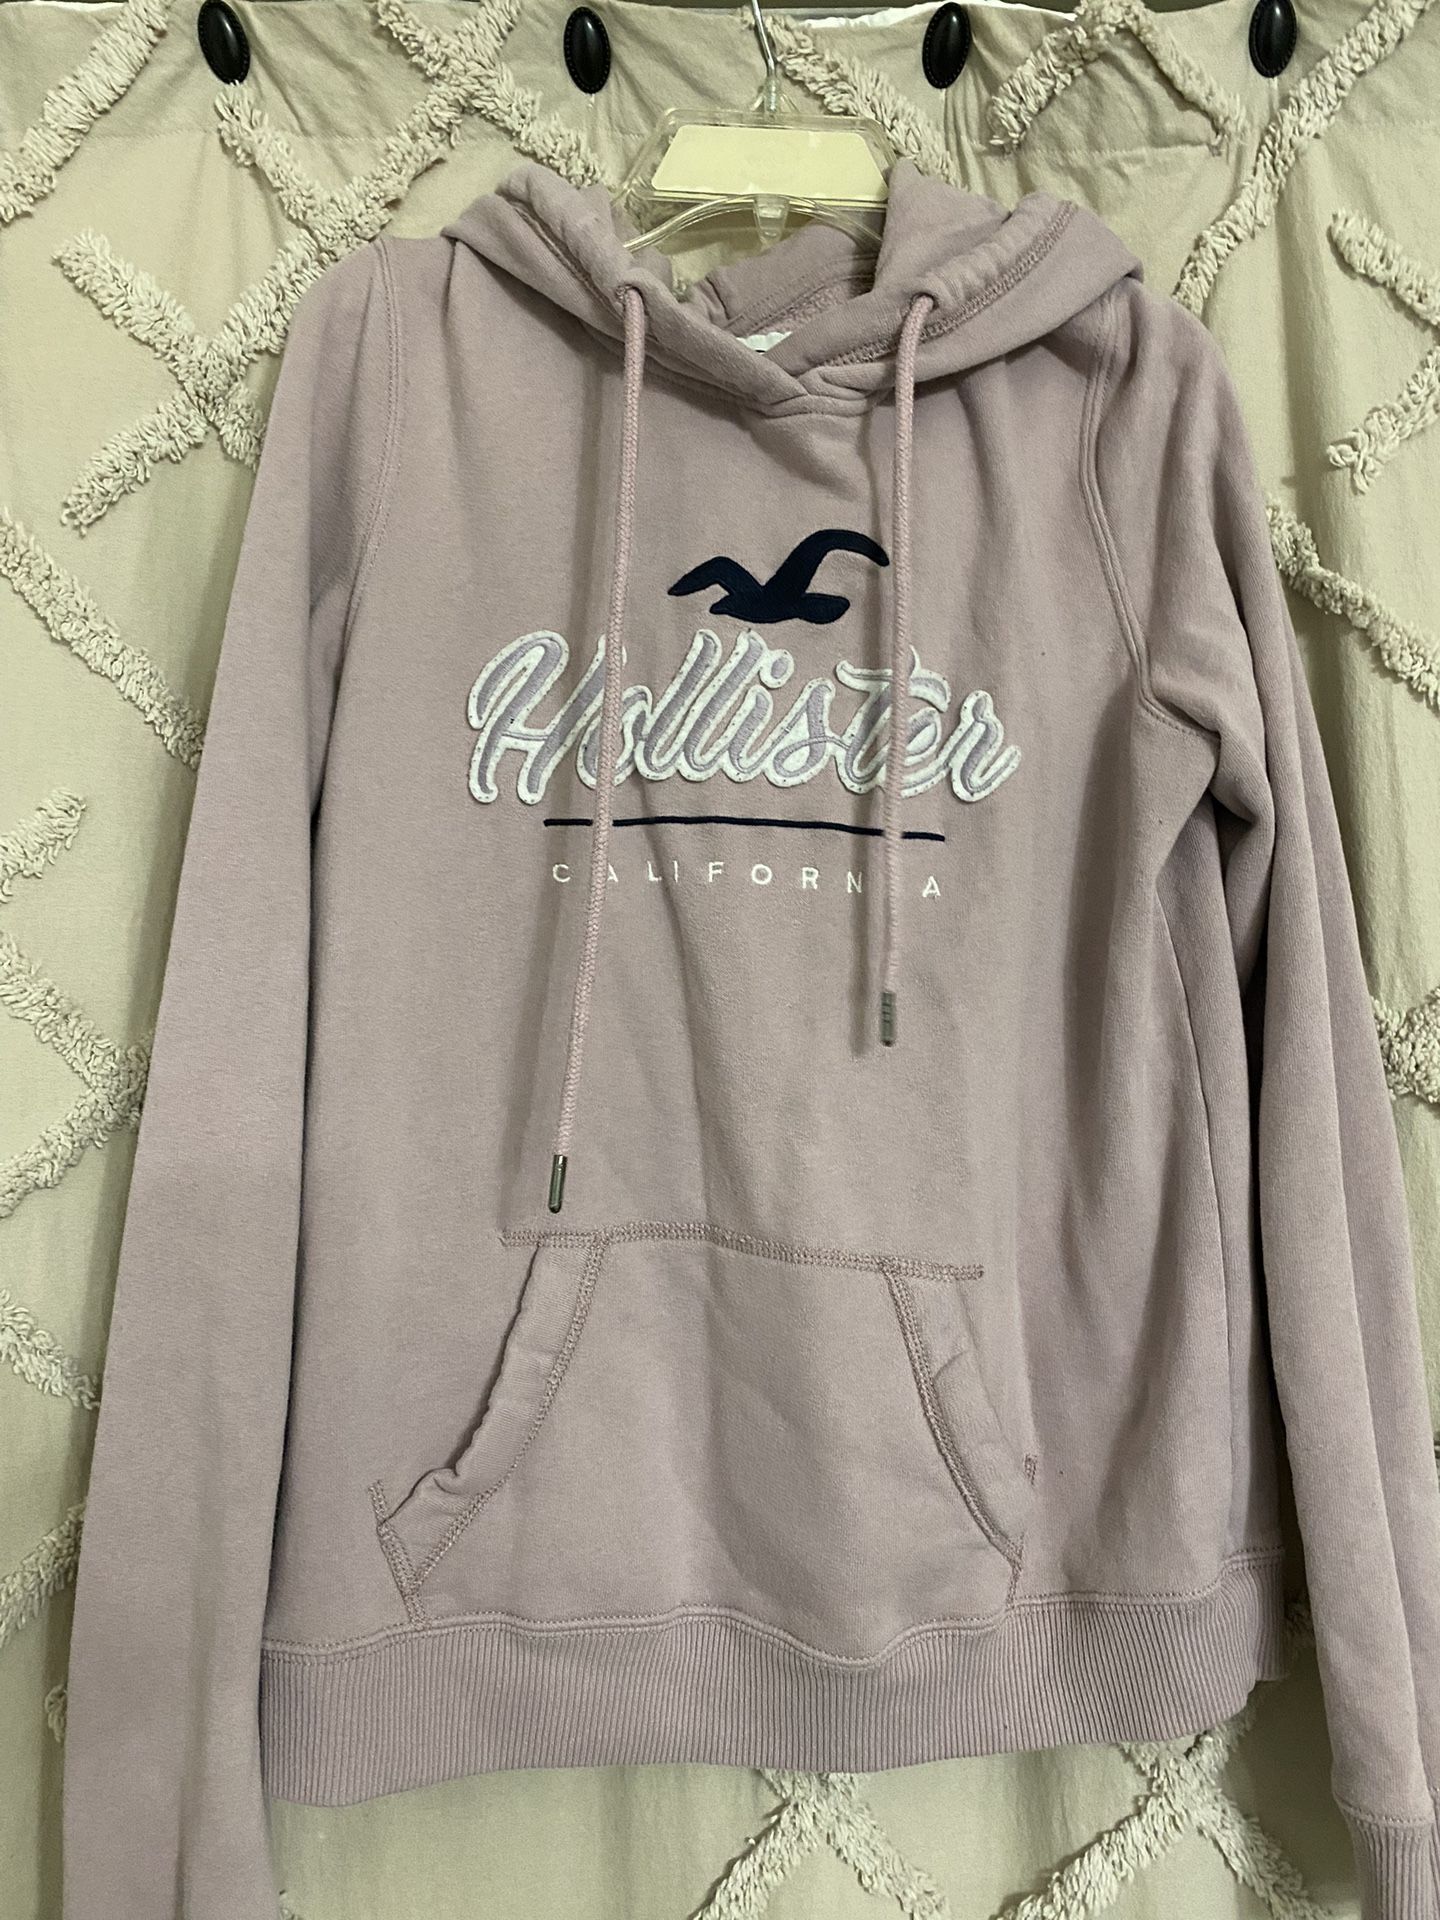 USED HOLLISTER HOODIES FOR WOMEN .SIZE MEDIUM…$20 DLLS For BOTH  …FIRM /NO DELIVERY 